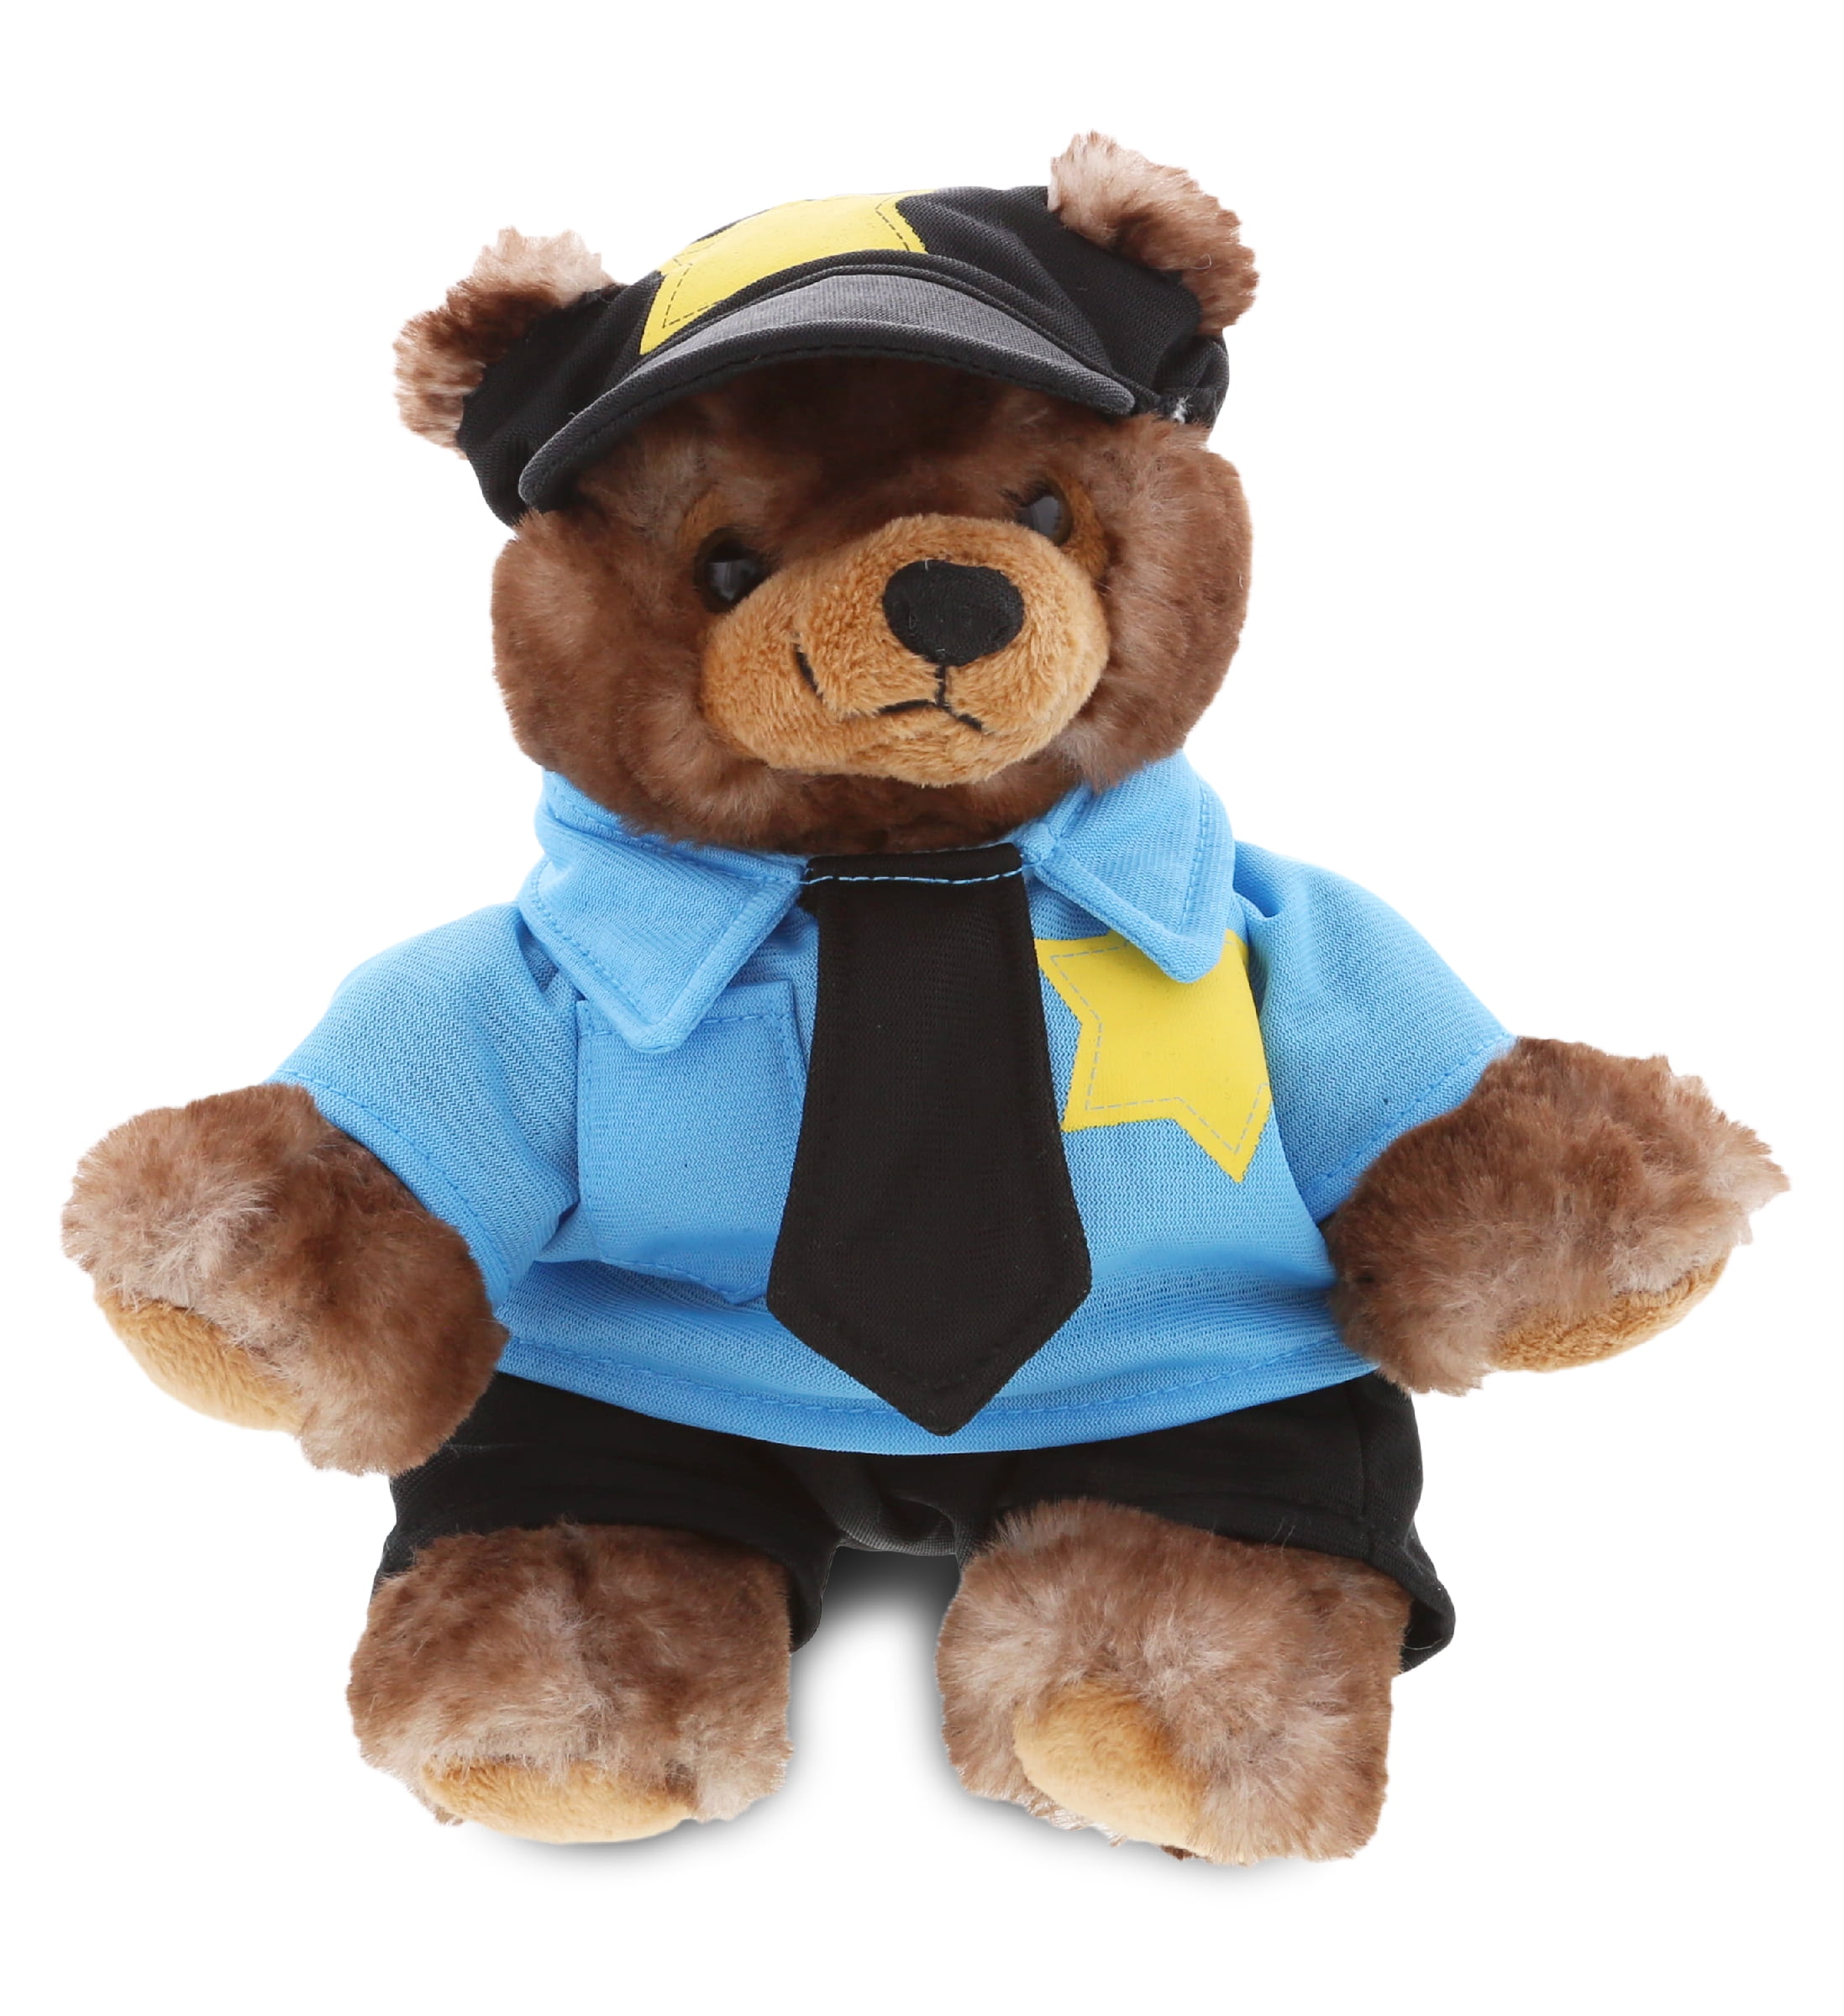 9" Inches DolliBu Sitting Pig Police Officer Plush Toy with Cop Uniform & Cap